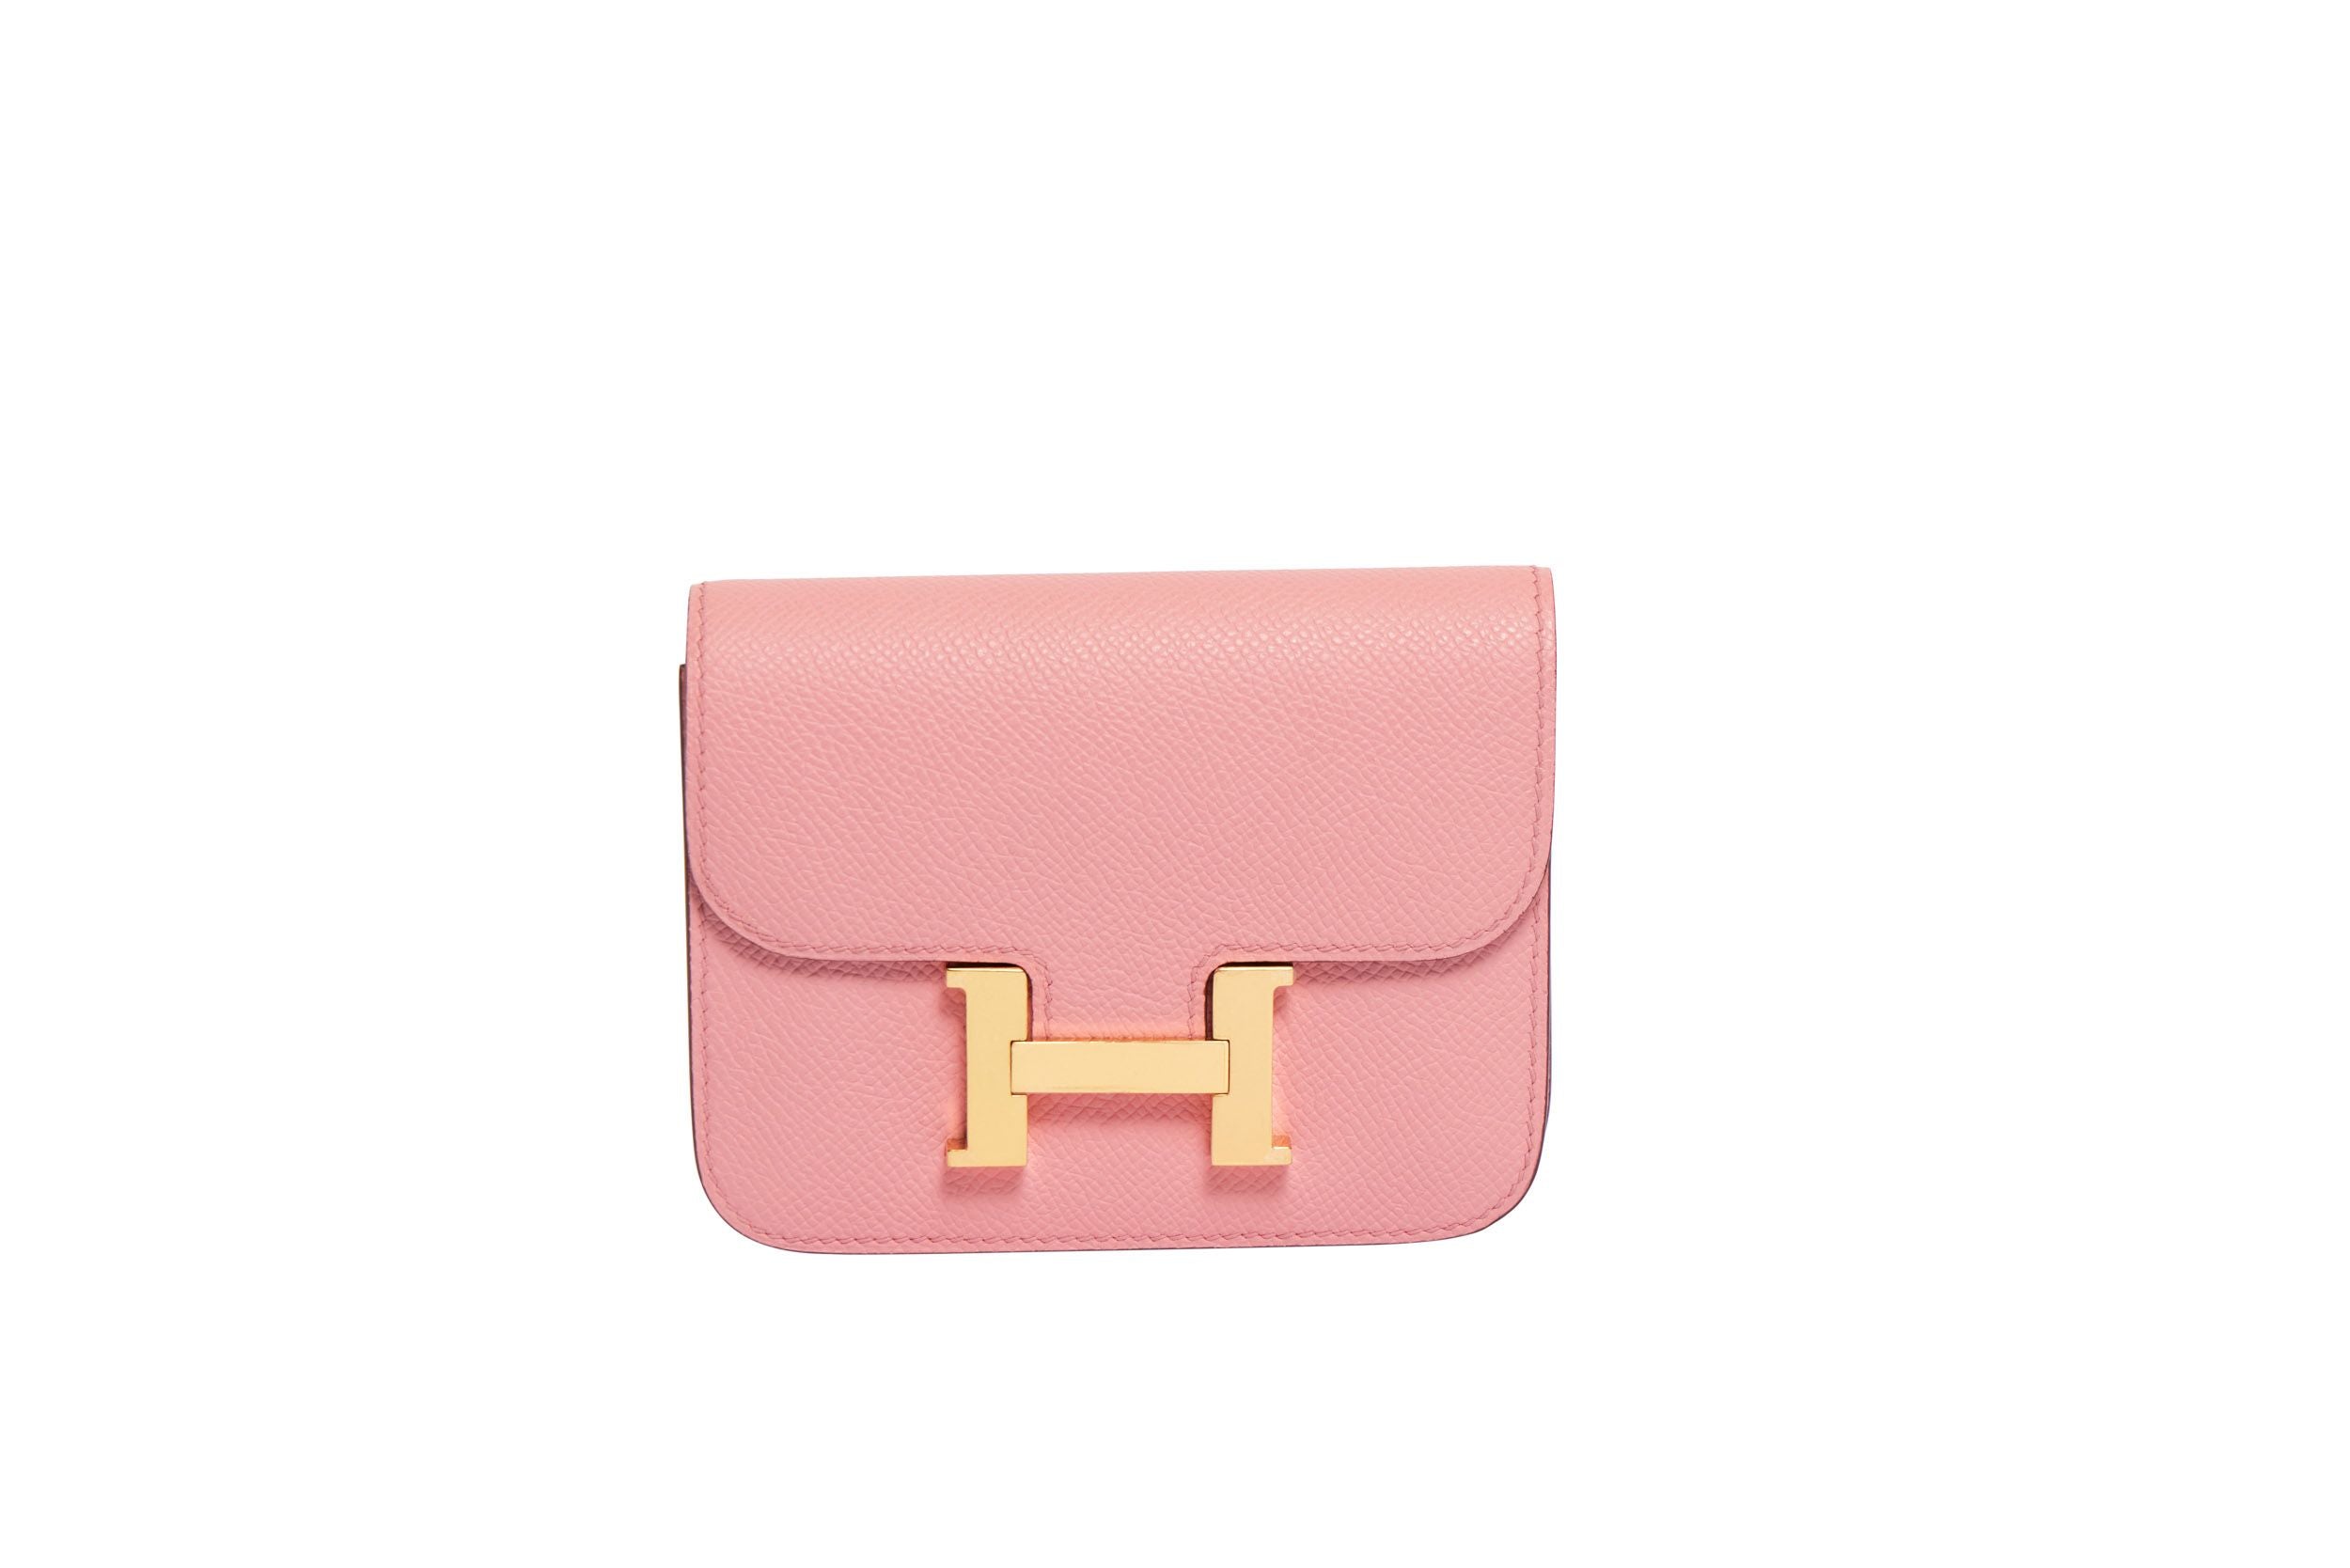 Hermes Rose Confetti Epsom Constance Compact Wallet New